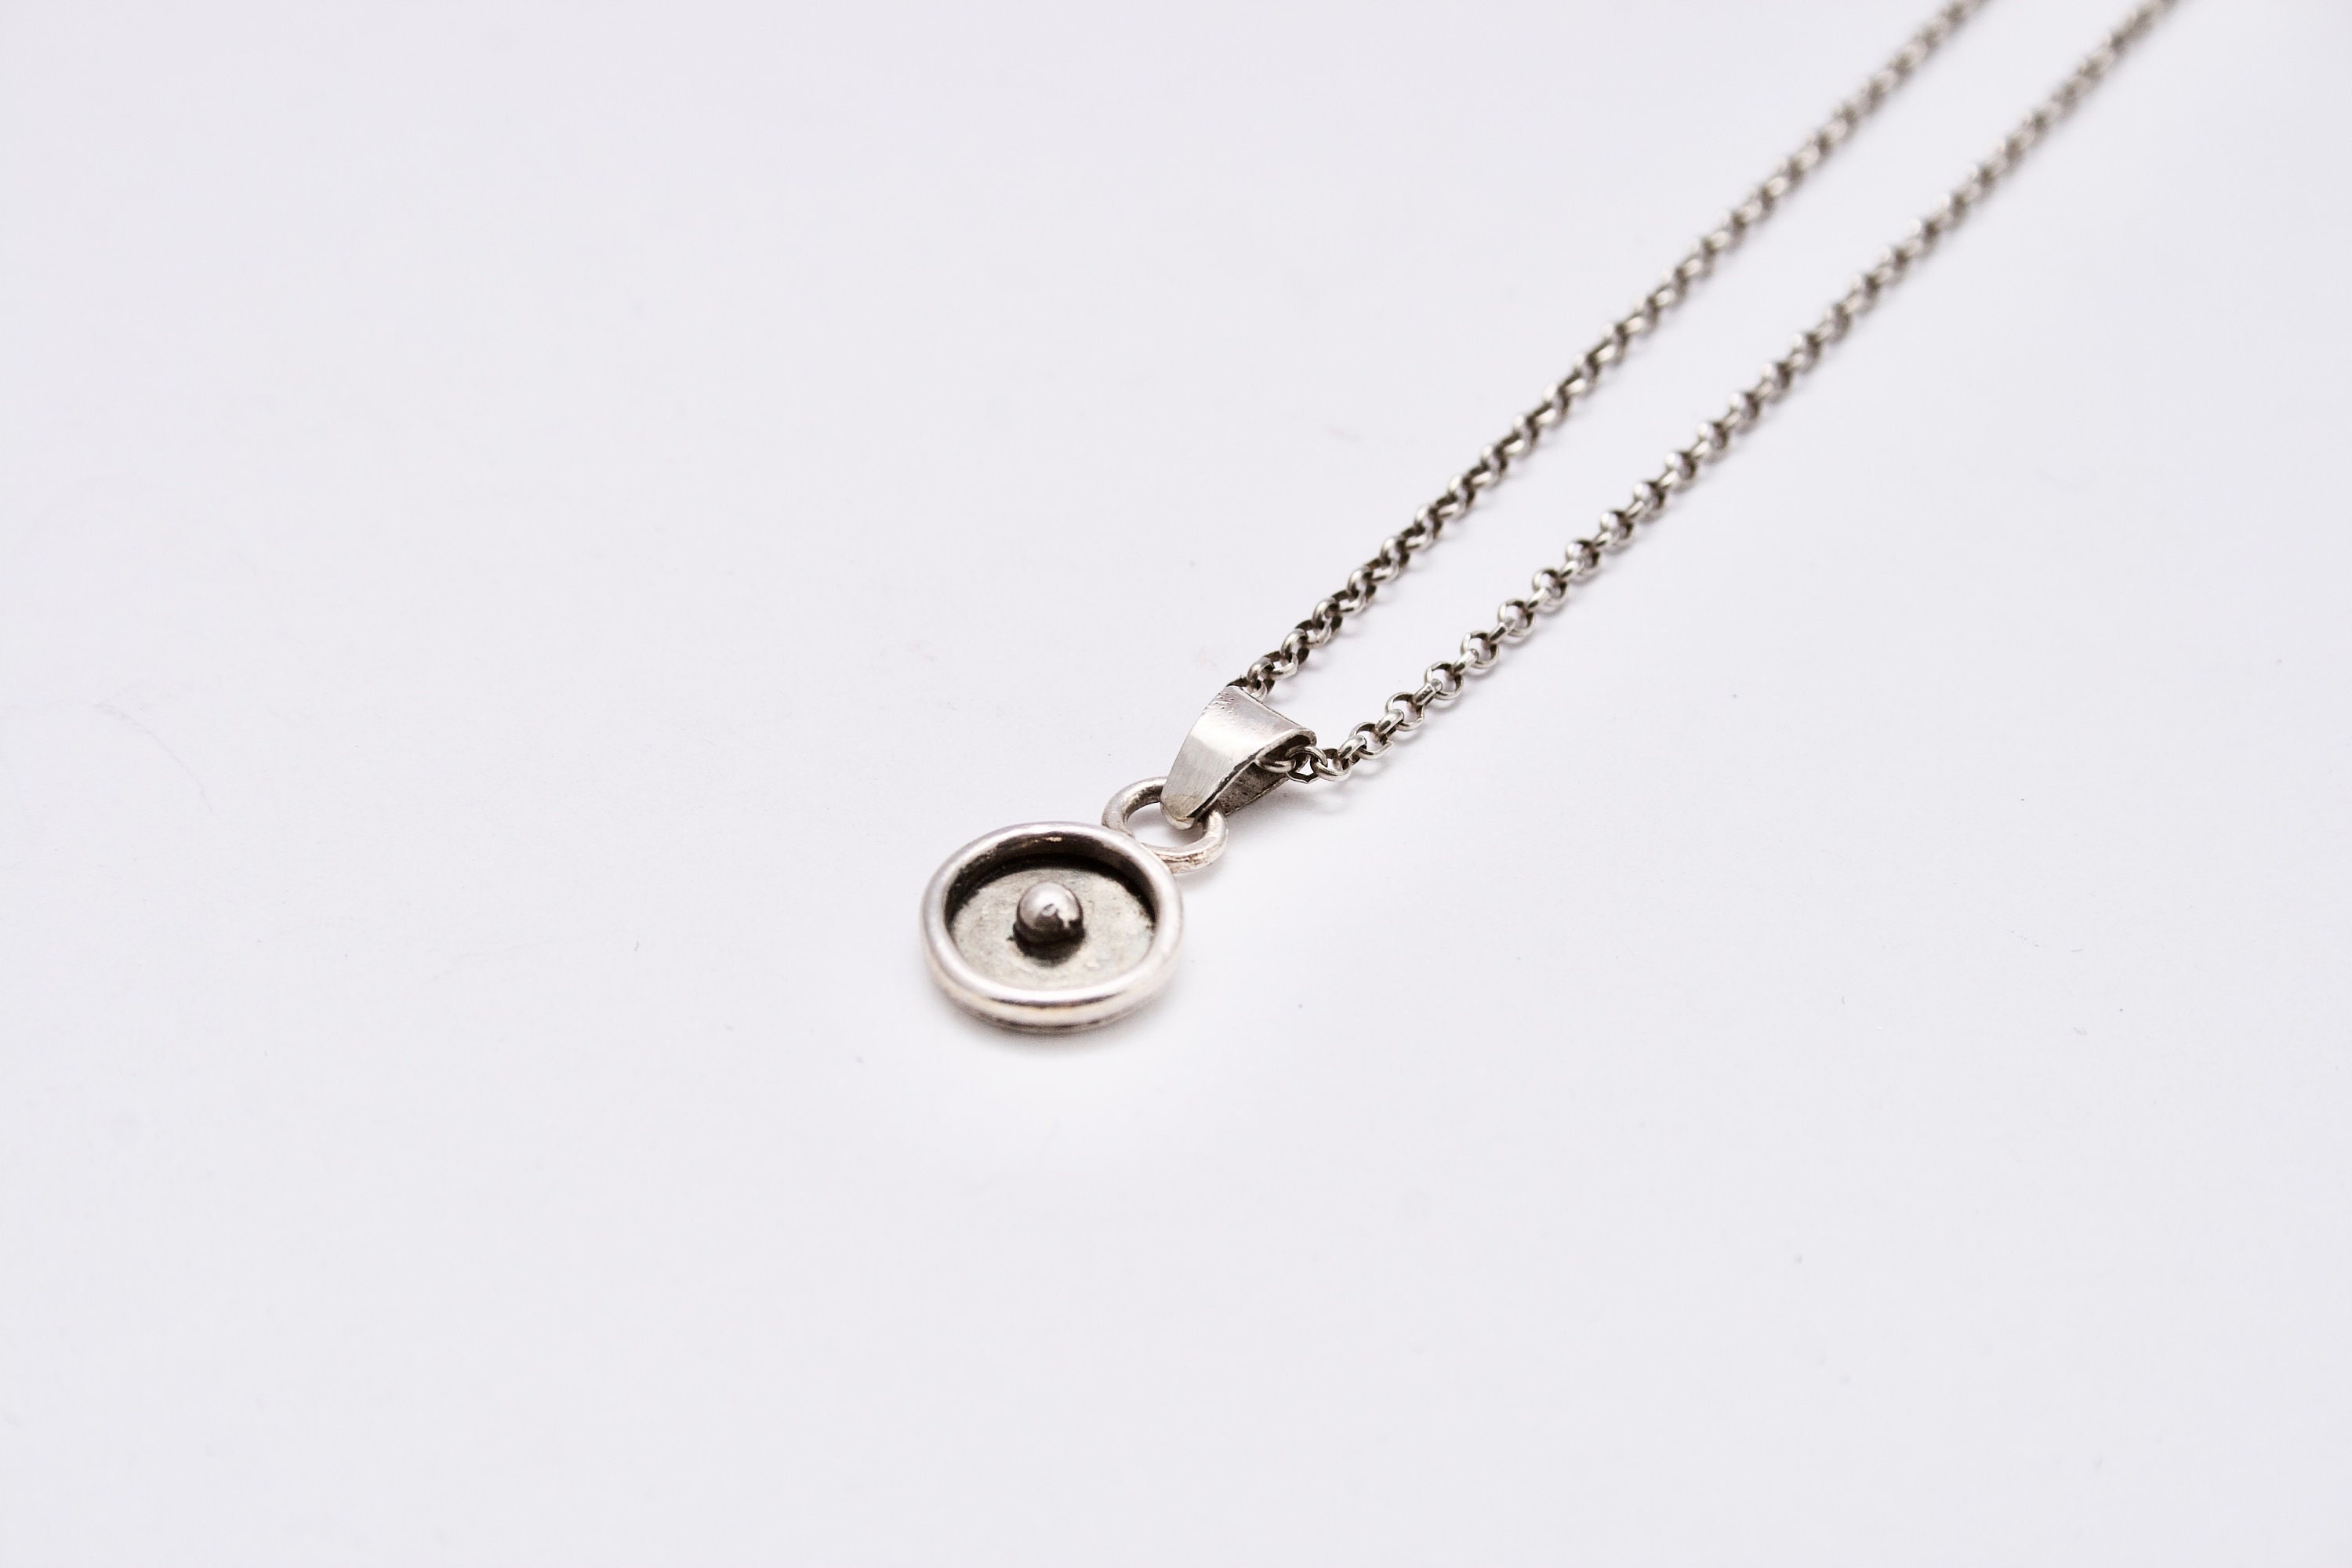 Talisman charm necklace in white gold